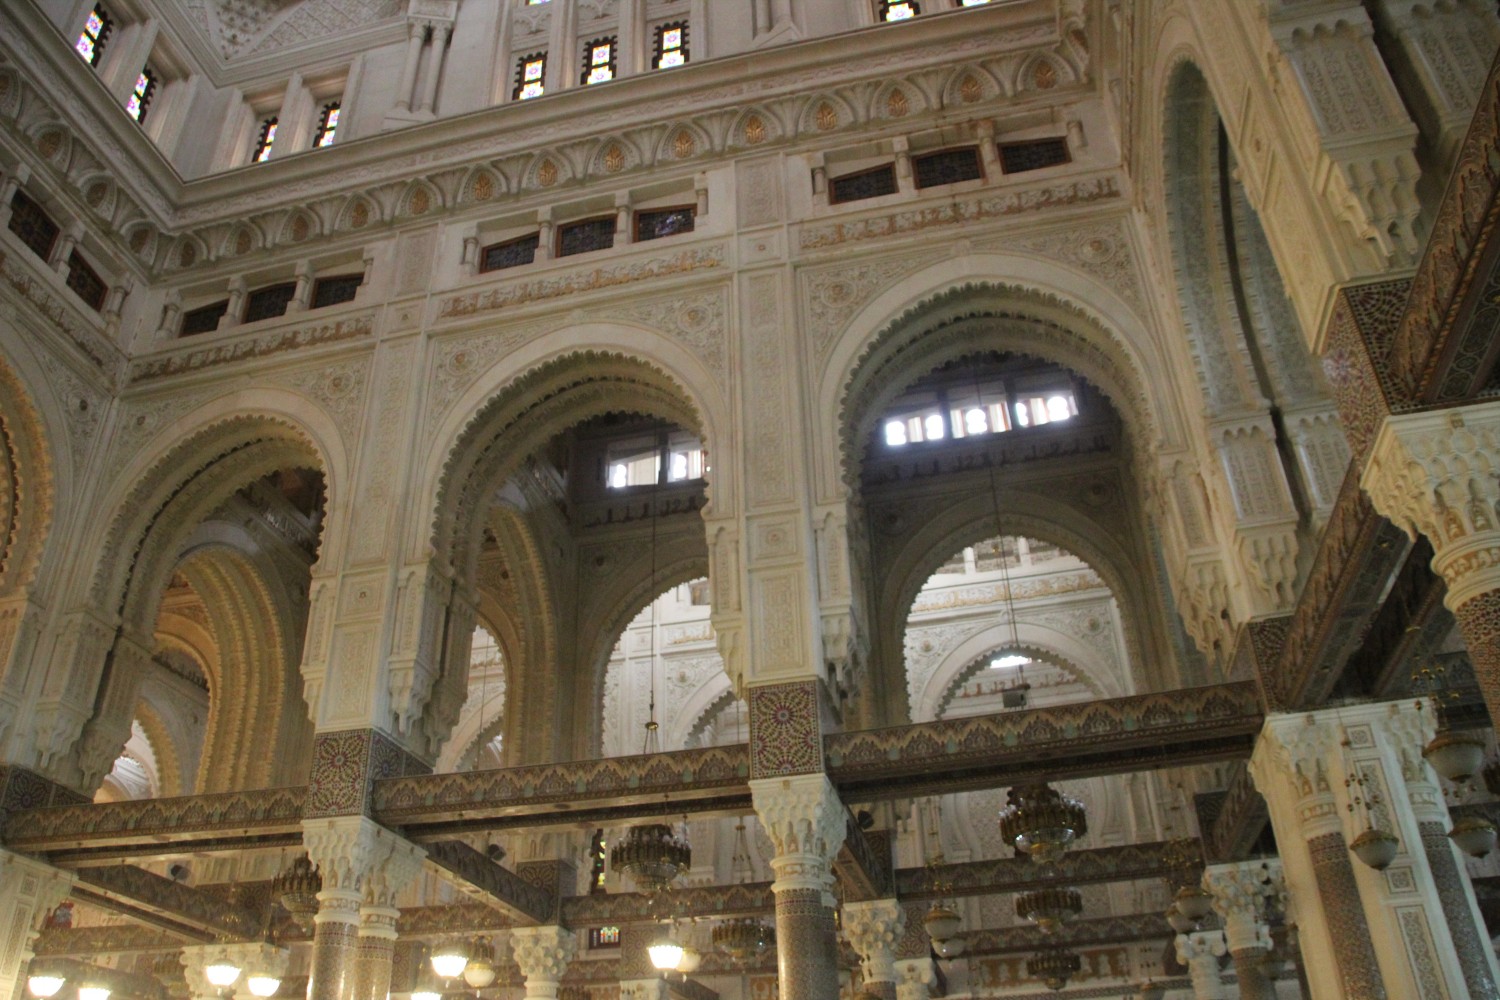 <p>The main prayer hall, arches supporting the main dome</p>